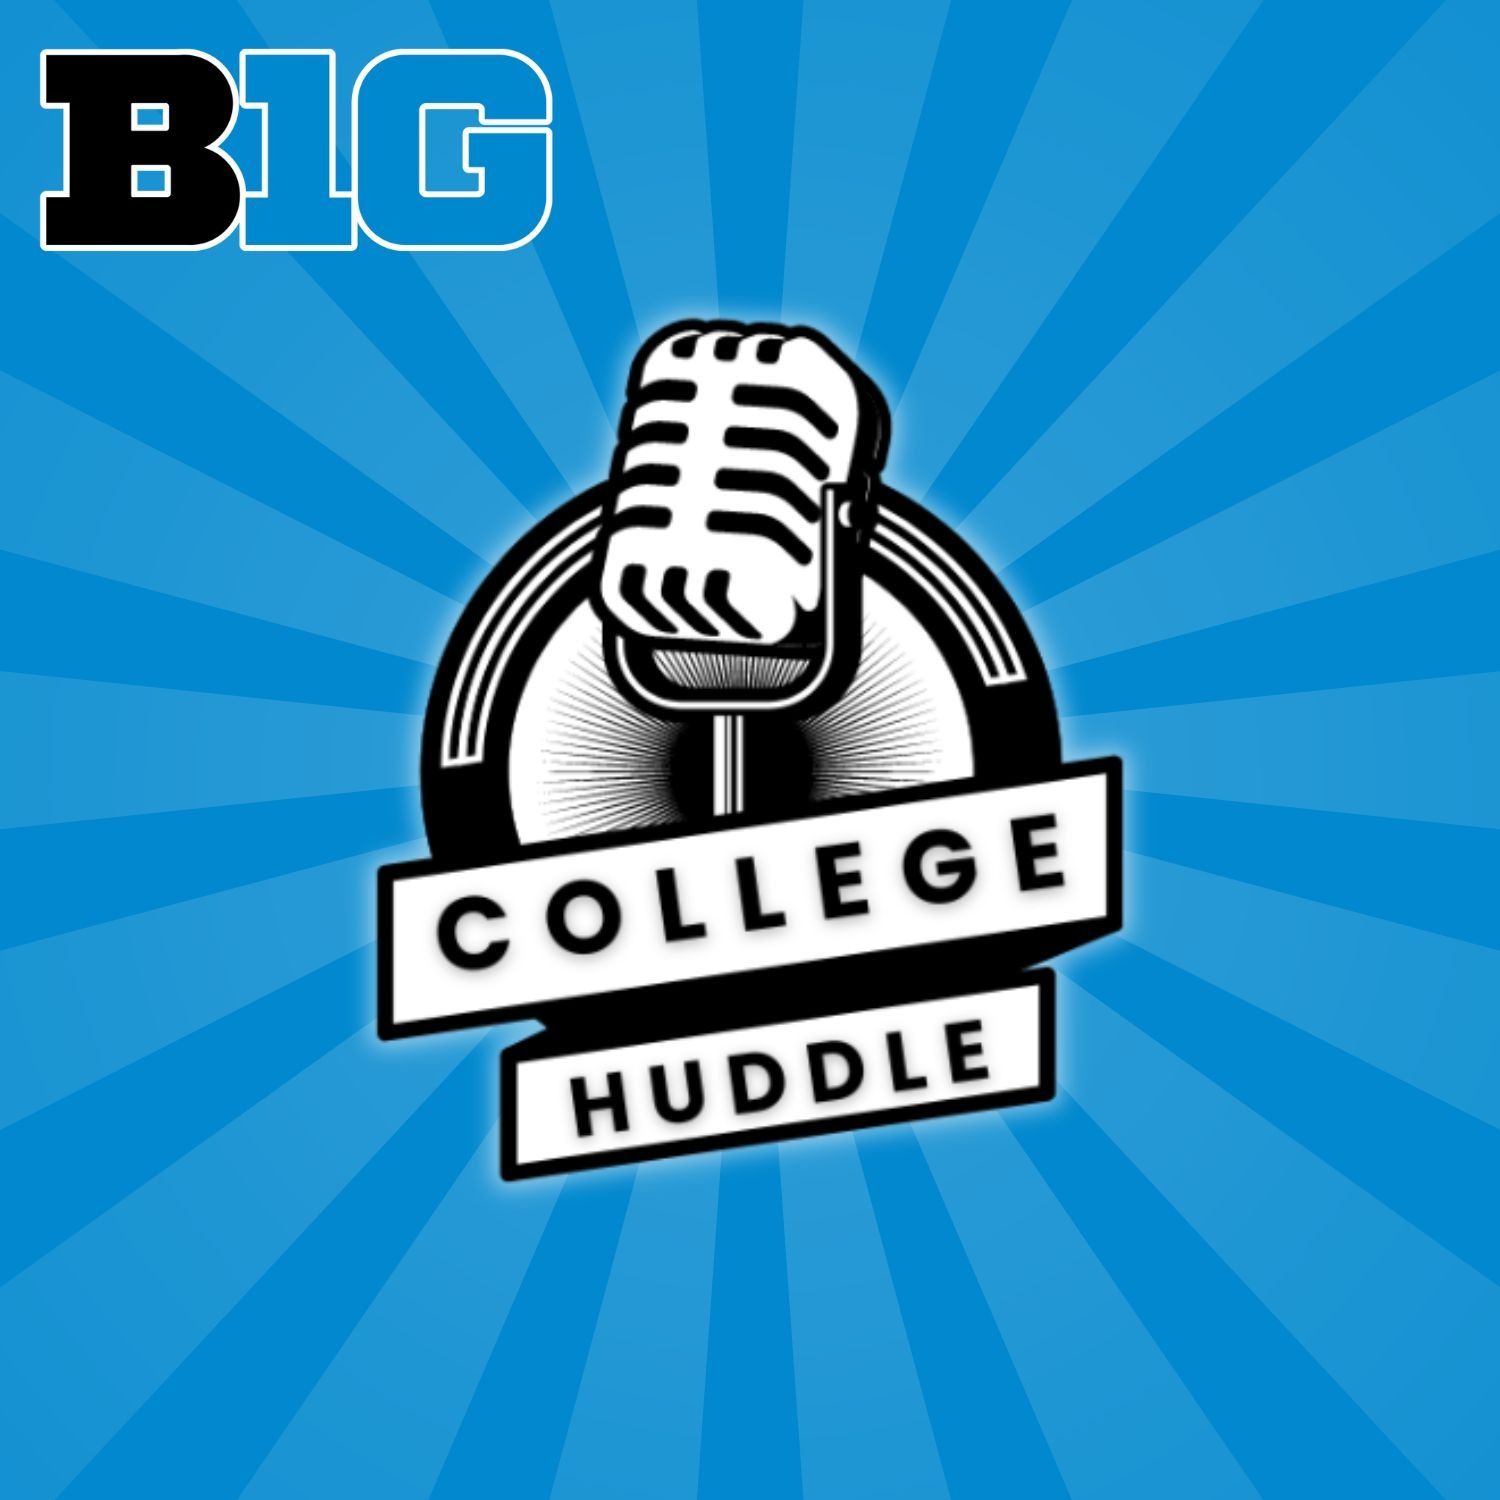 THE BIG TEN HUDDLE: Did the Big Ten Say NO to Florida State and Clemson?